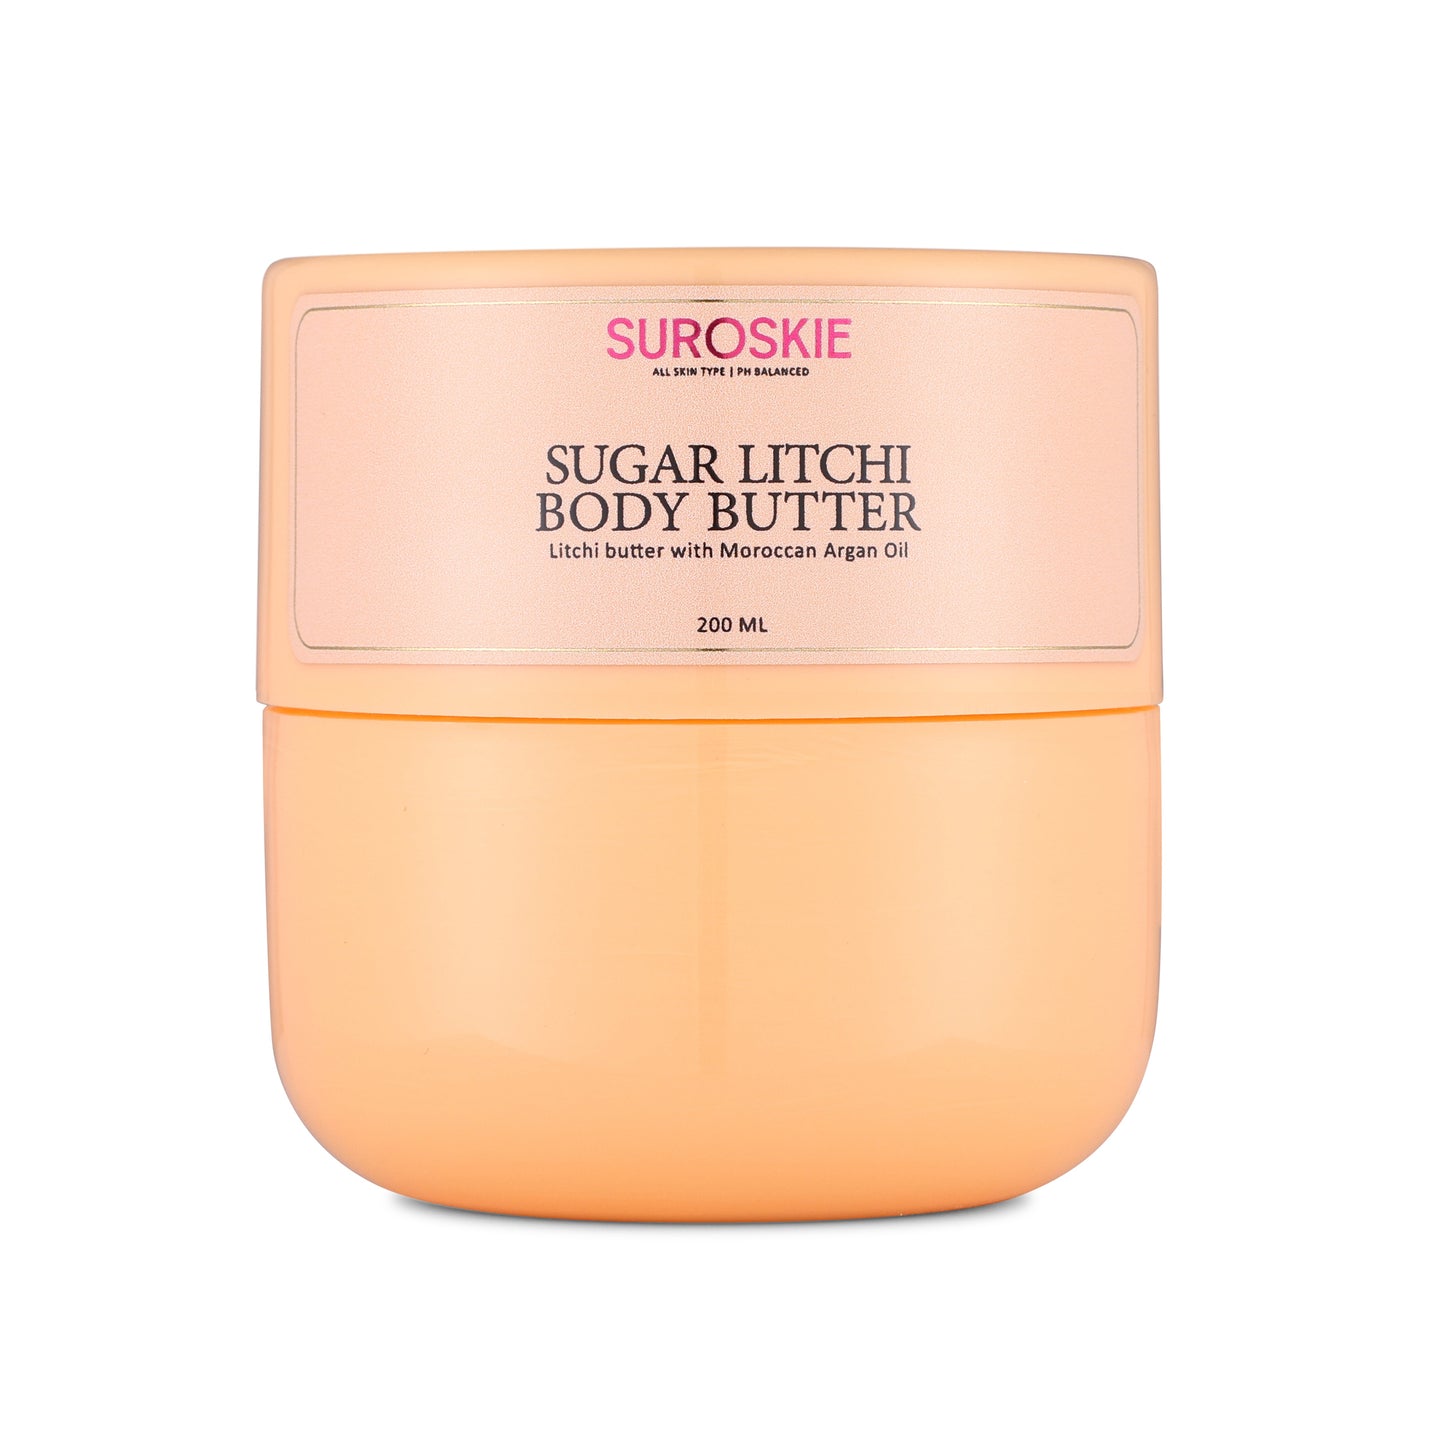 Sugar Litchi Body Butter - Buy 3 Pay for 1